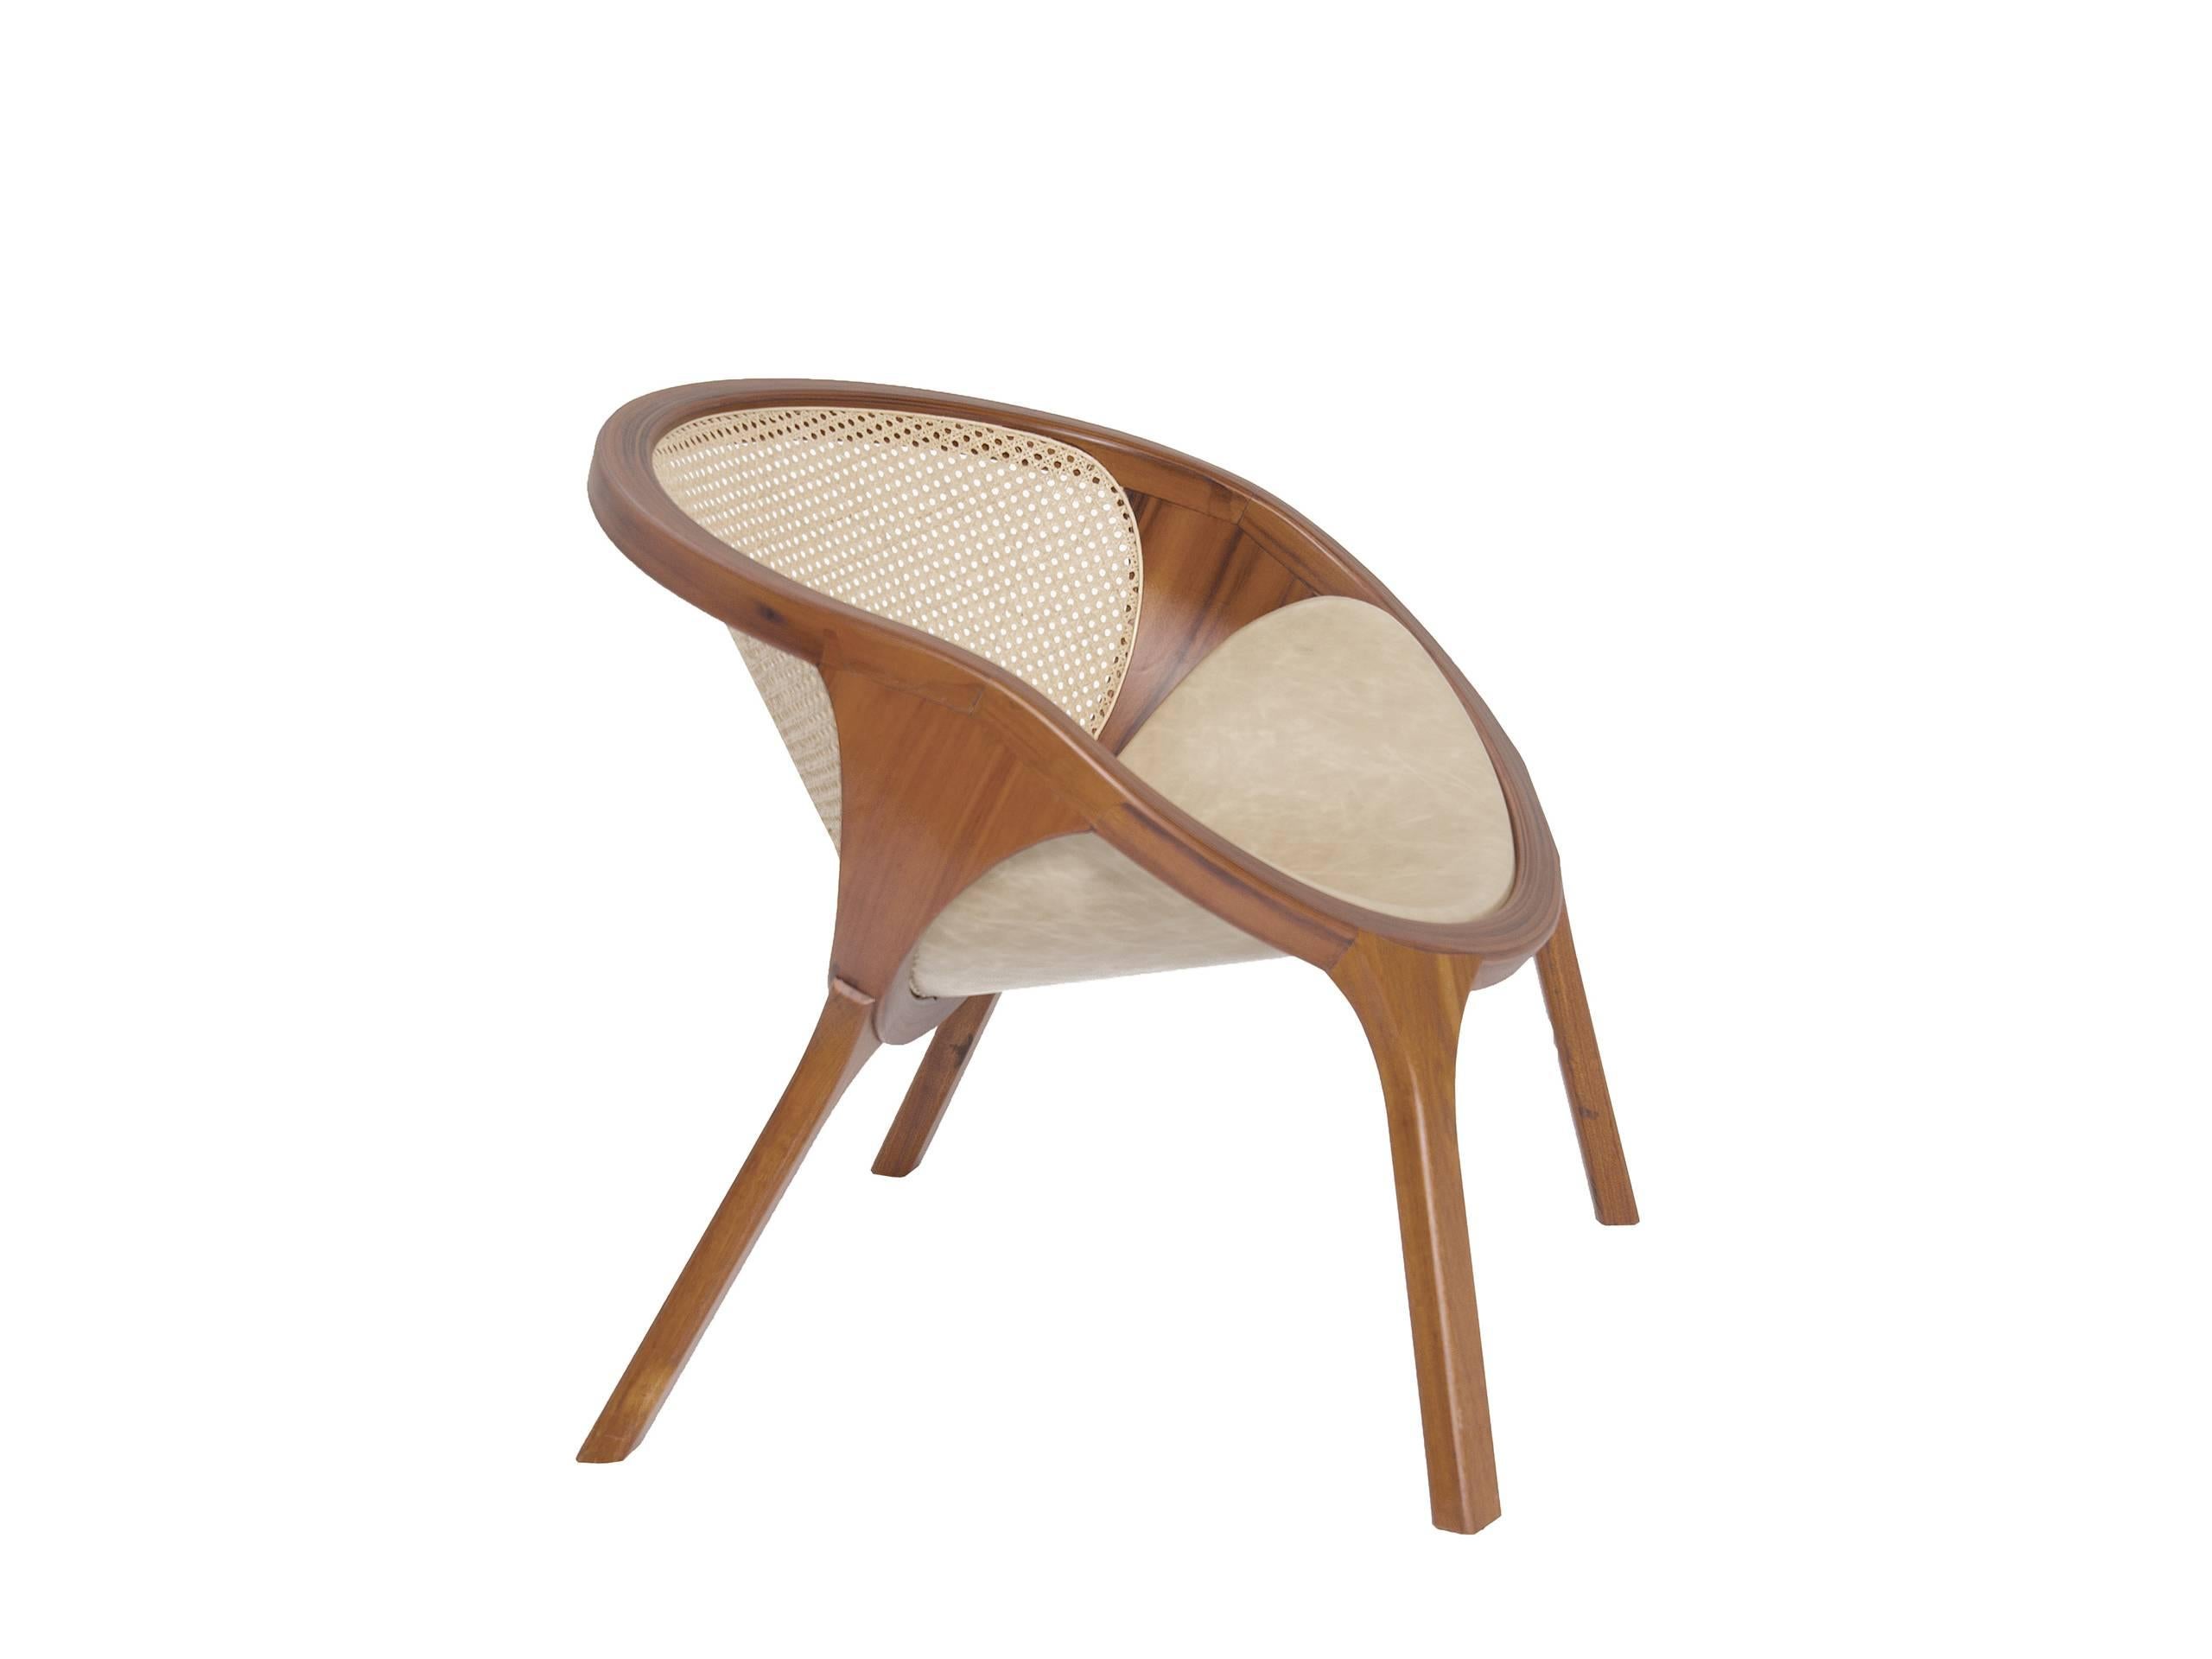 A wooden structure rises to form two equal elliptic shapes making up seat and back respectively. We believe to have attained a combination of geometric and iconographic simplicity with great ergonomics.